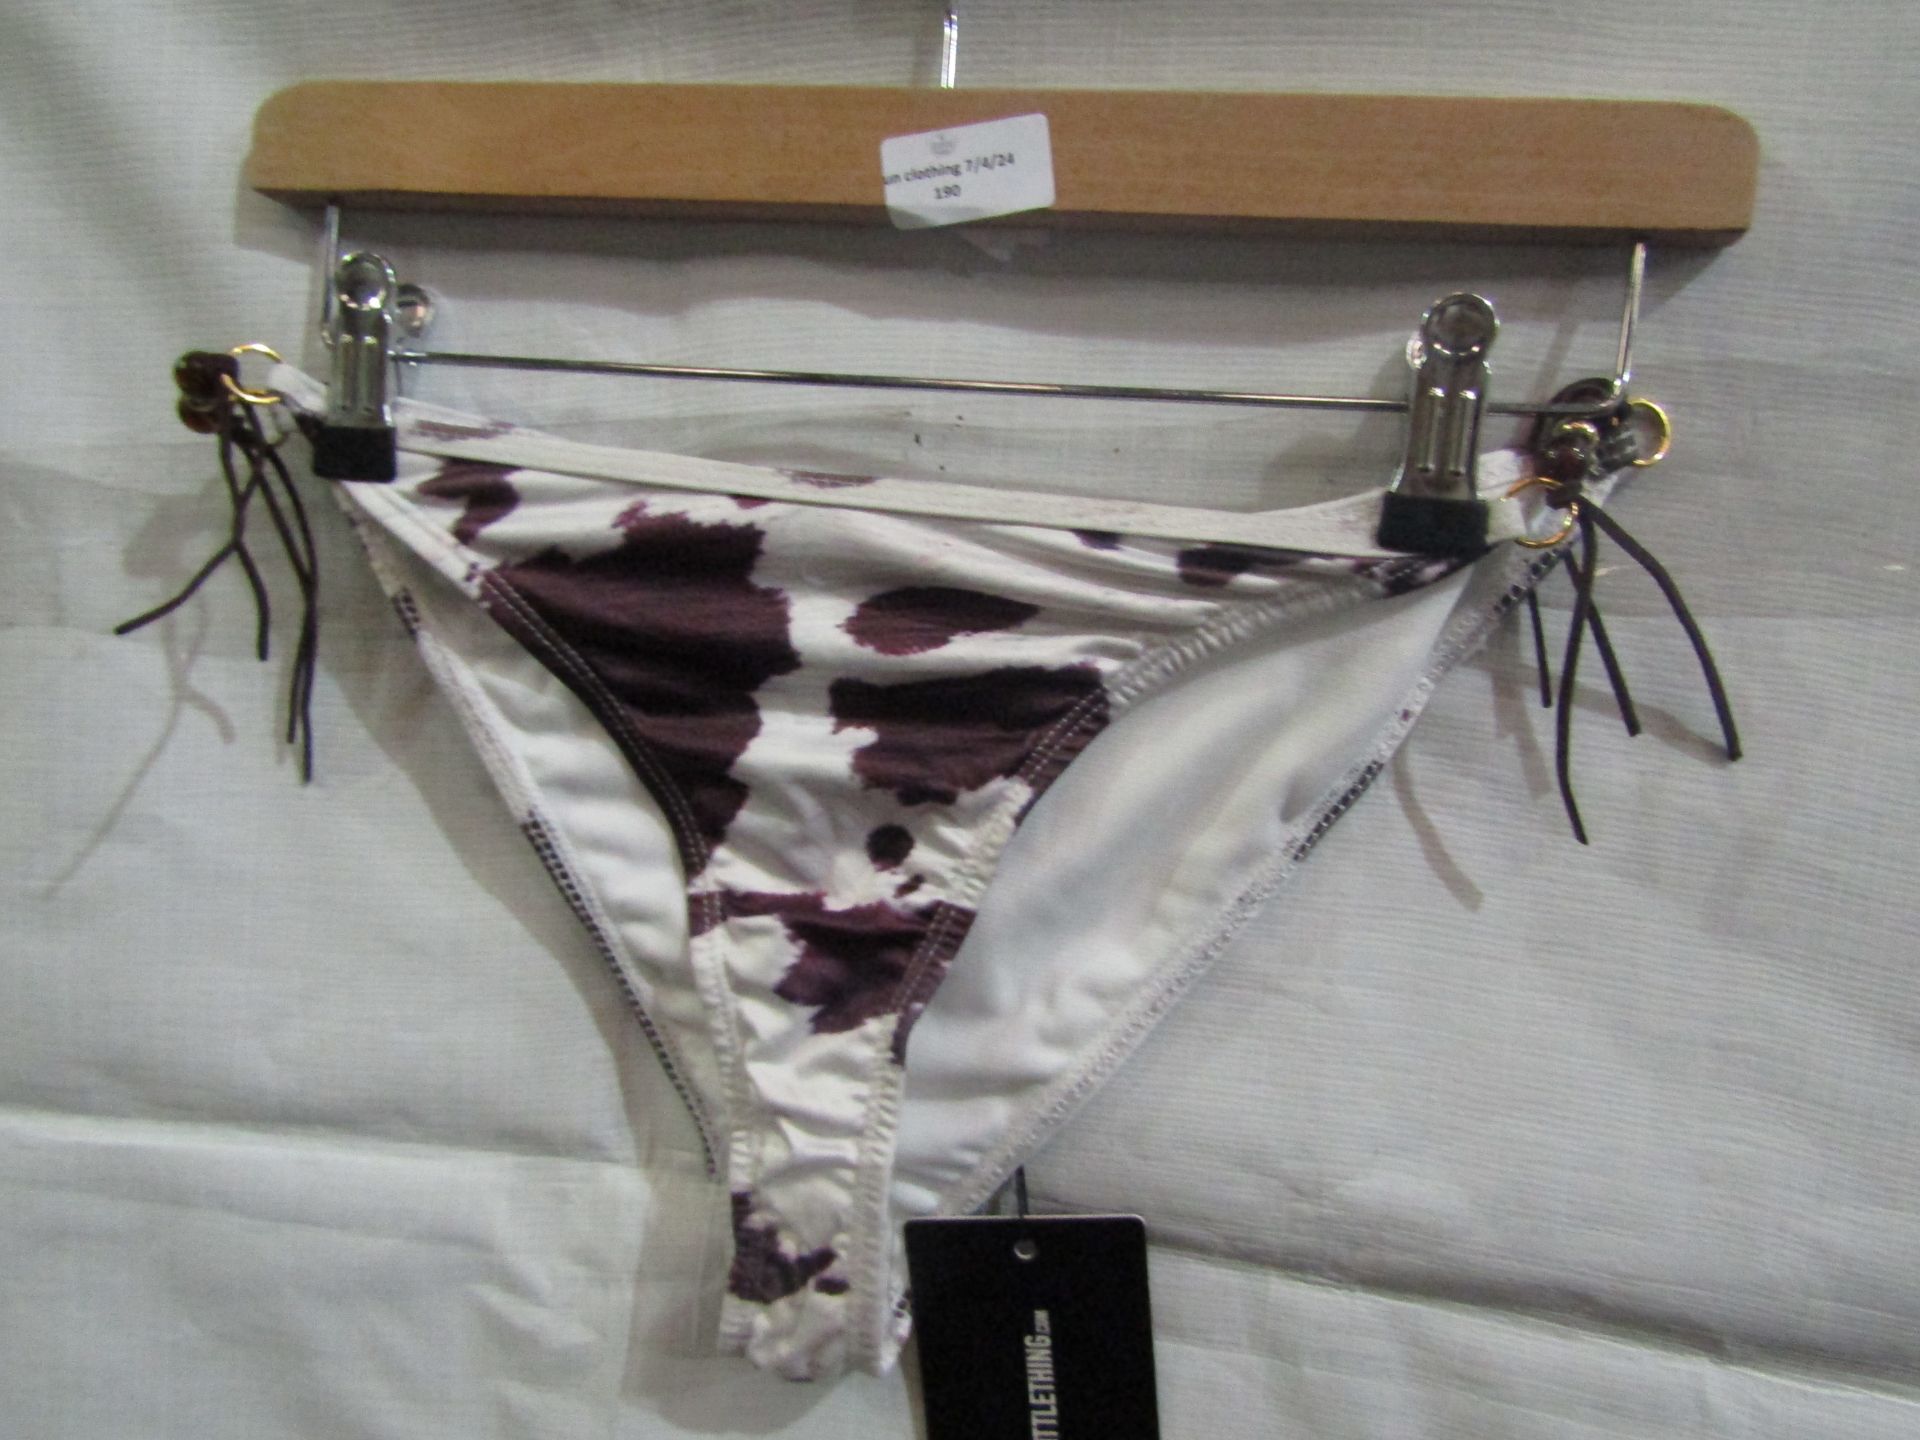 2x Pretty Little Thing Brown Cow Print Beaded Tie Bikini "s- Size 8, New & Packaged.